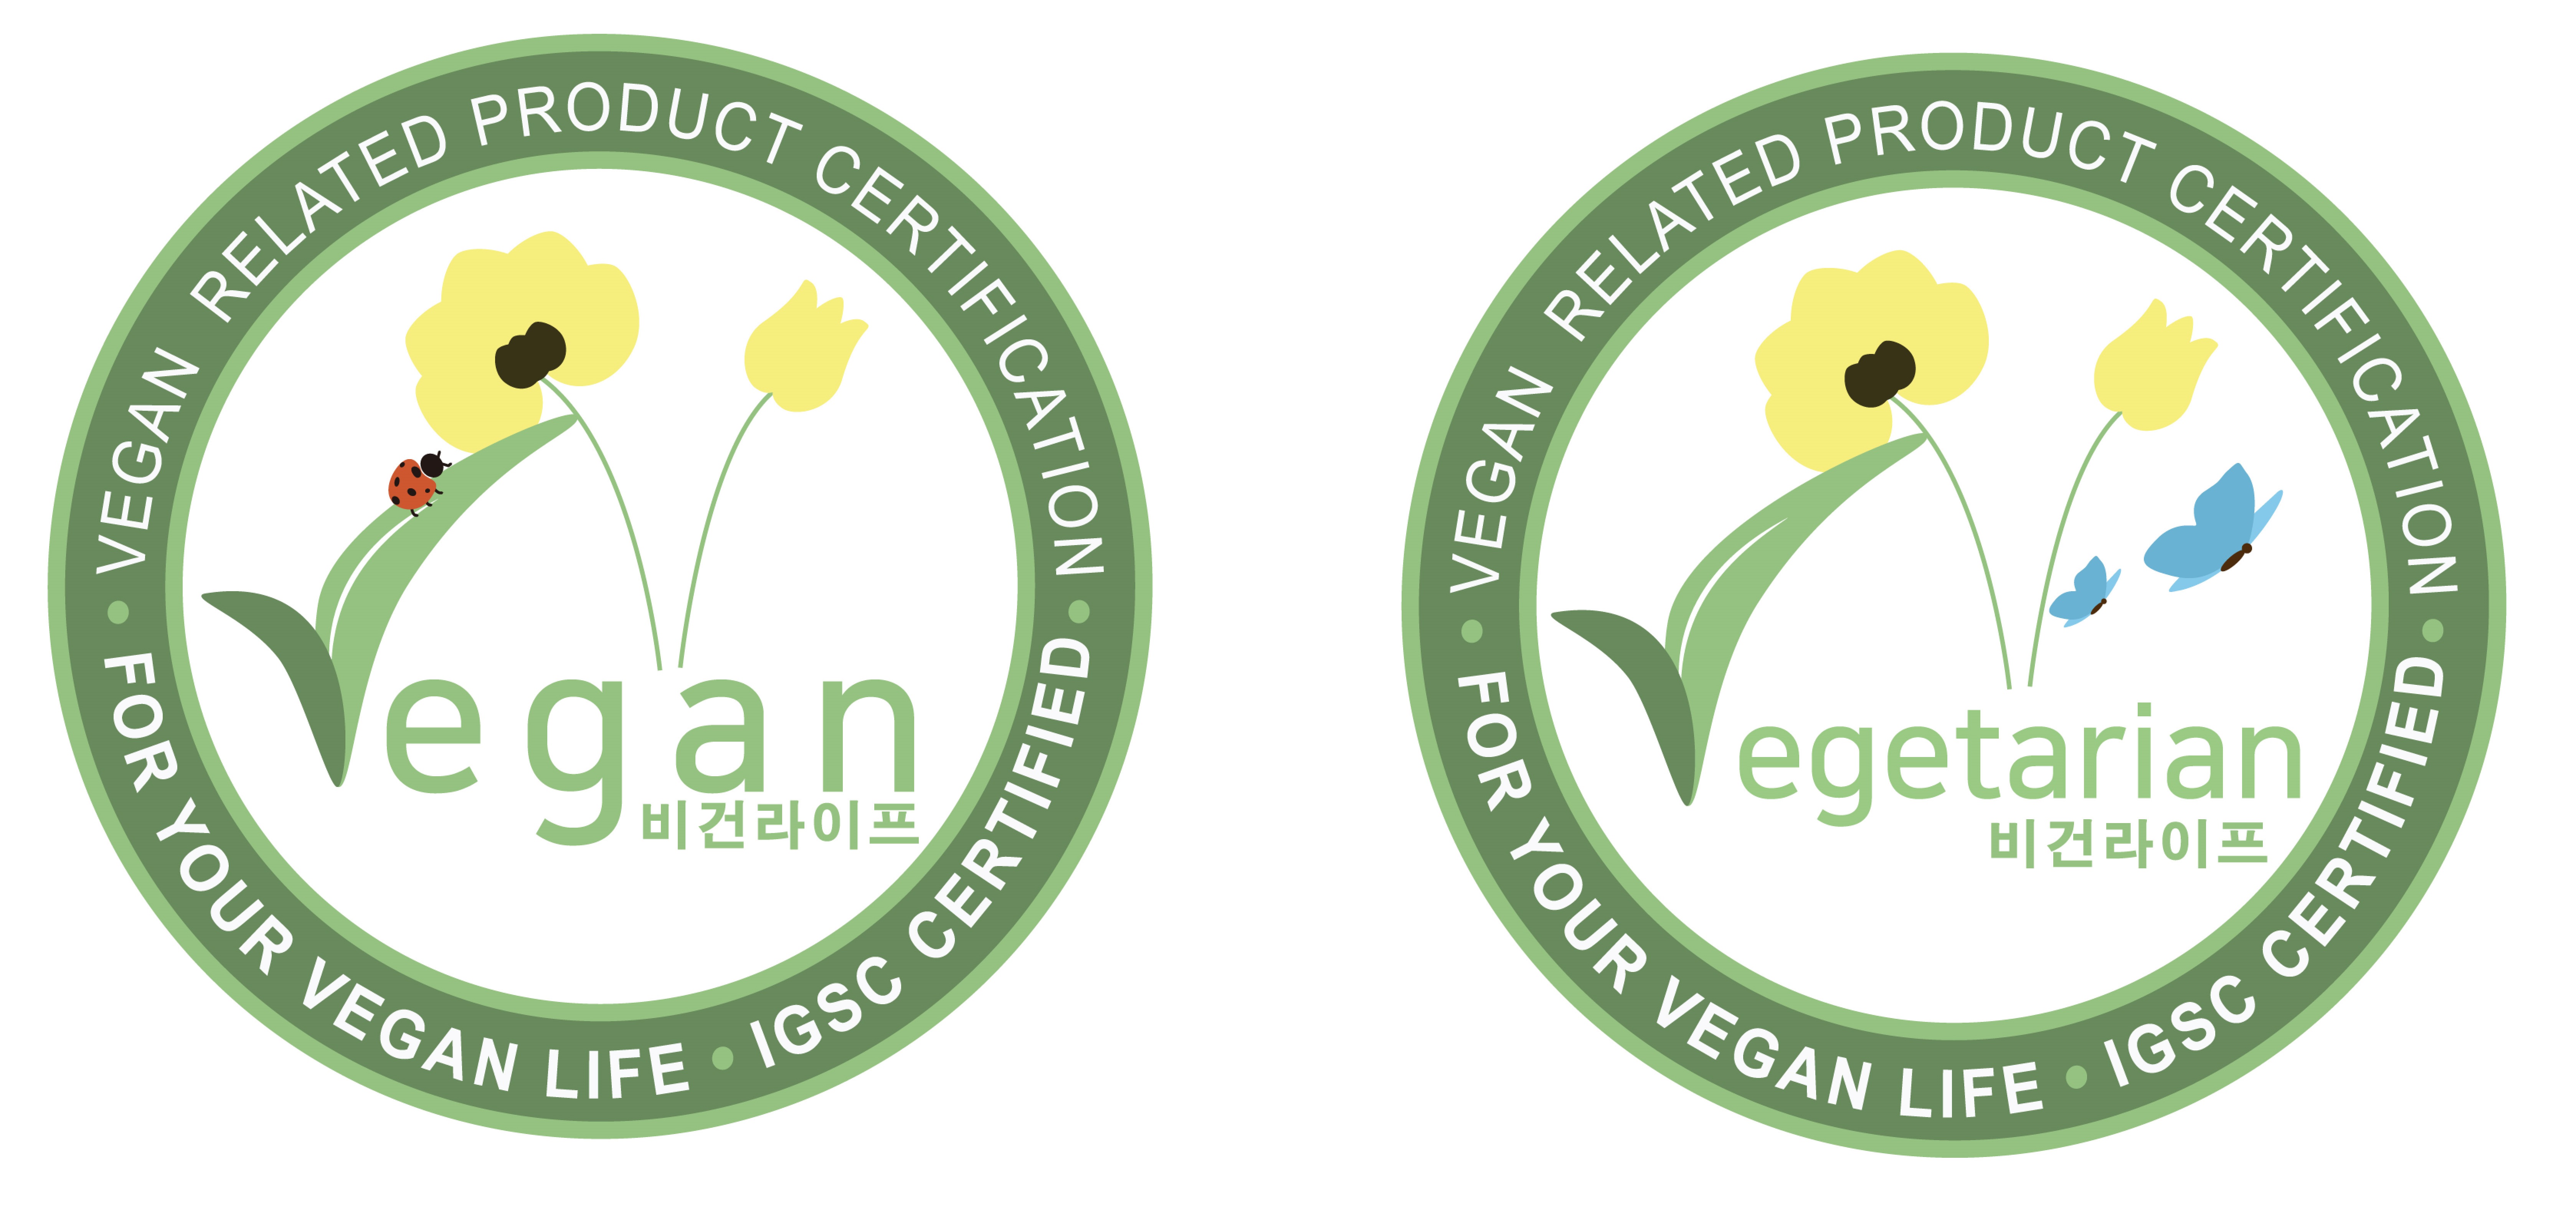 National Accreditation Center (NAC) recognizes International Vegan Standard (ISO 23662) by Institute of Global Sustainability Certification (IGSC)